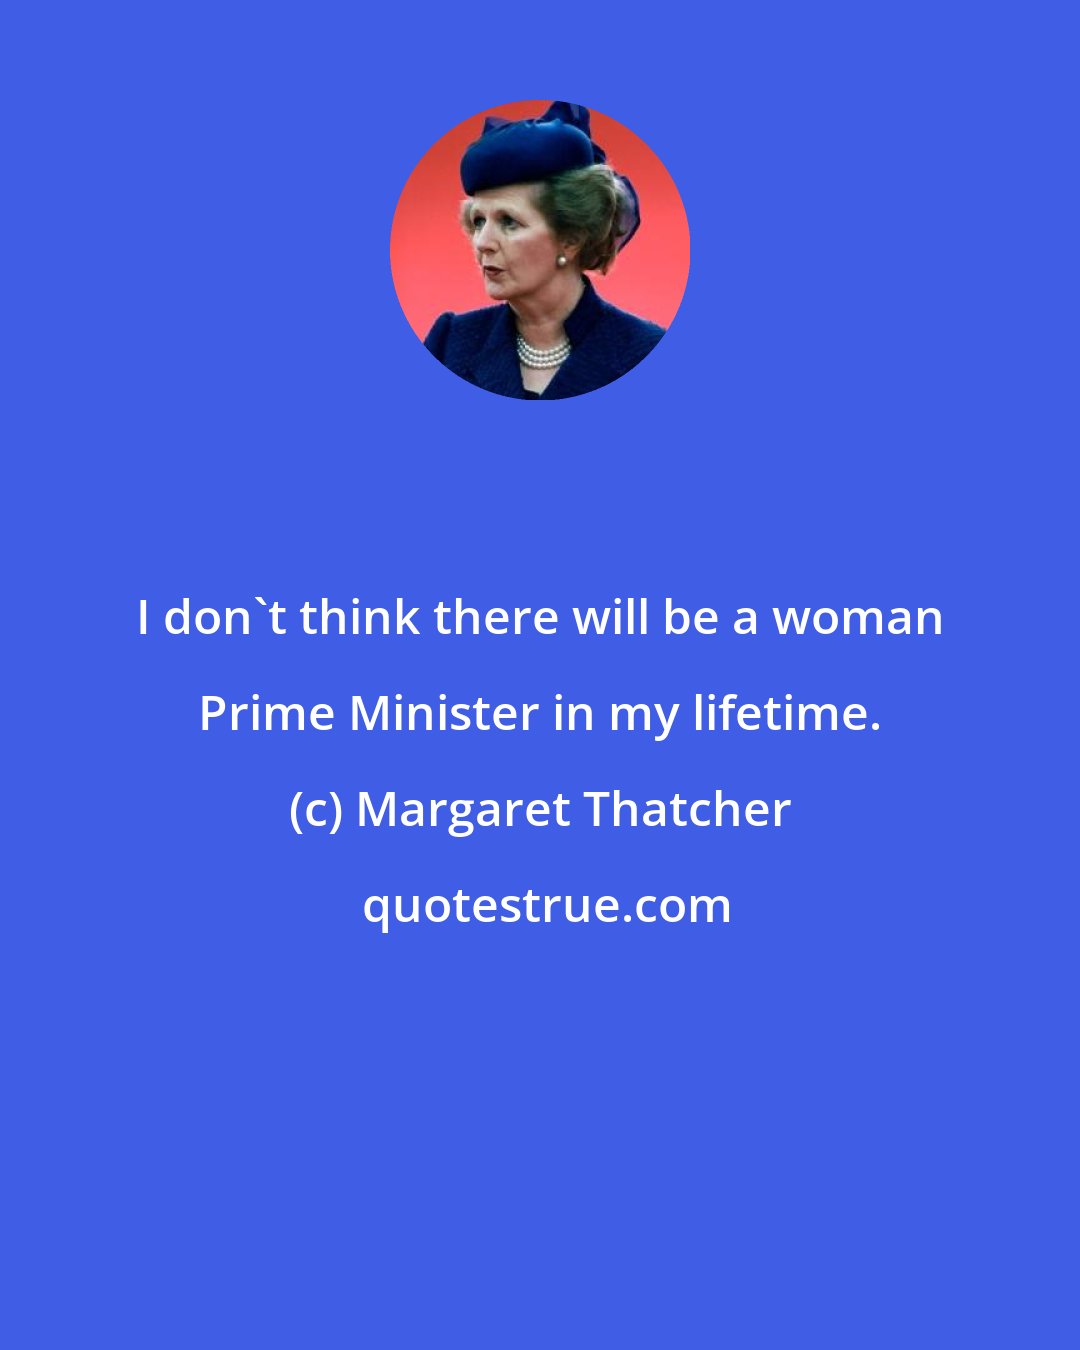 Margaret Thatcher: I don't think there will be a woman Prime Minister in my lifetime.